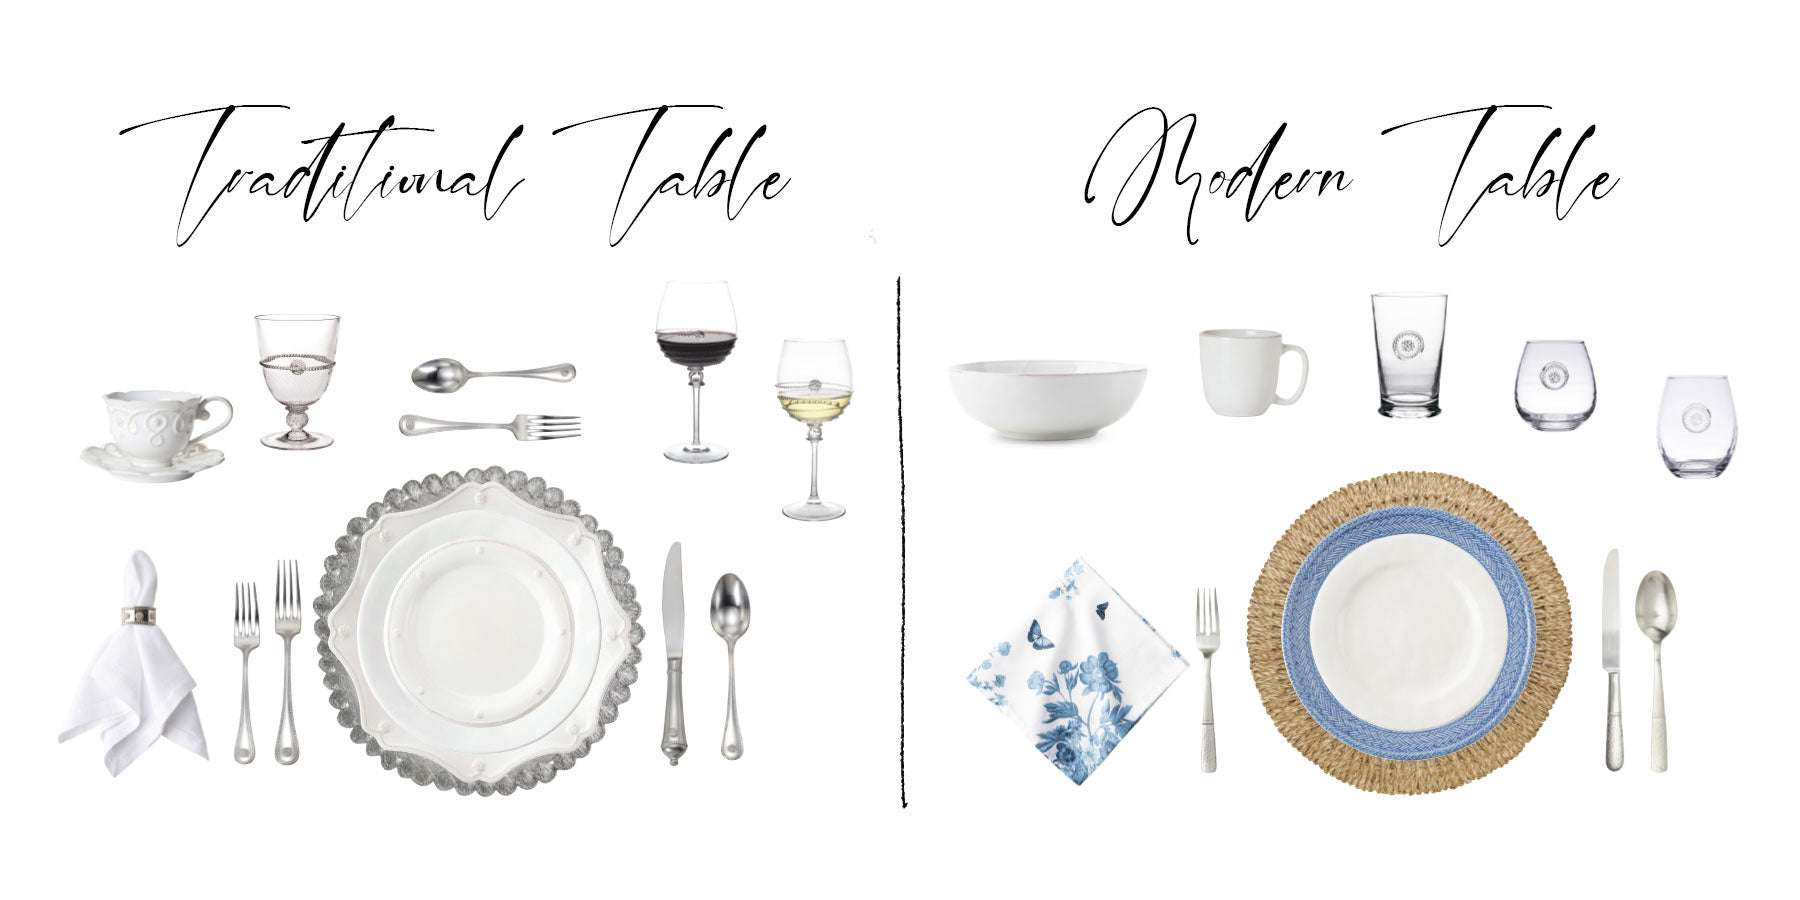 If you look at our table setting diagrams here, we invite you to reference the traditional method and the modern day precedent, and then gently (or not so gently) break those rules to suit your own lifestyle.